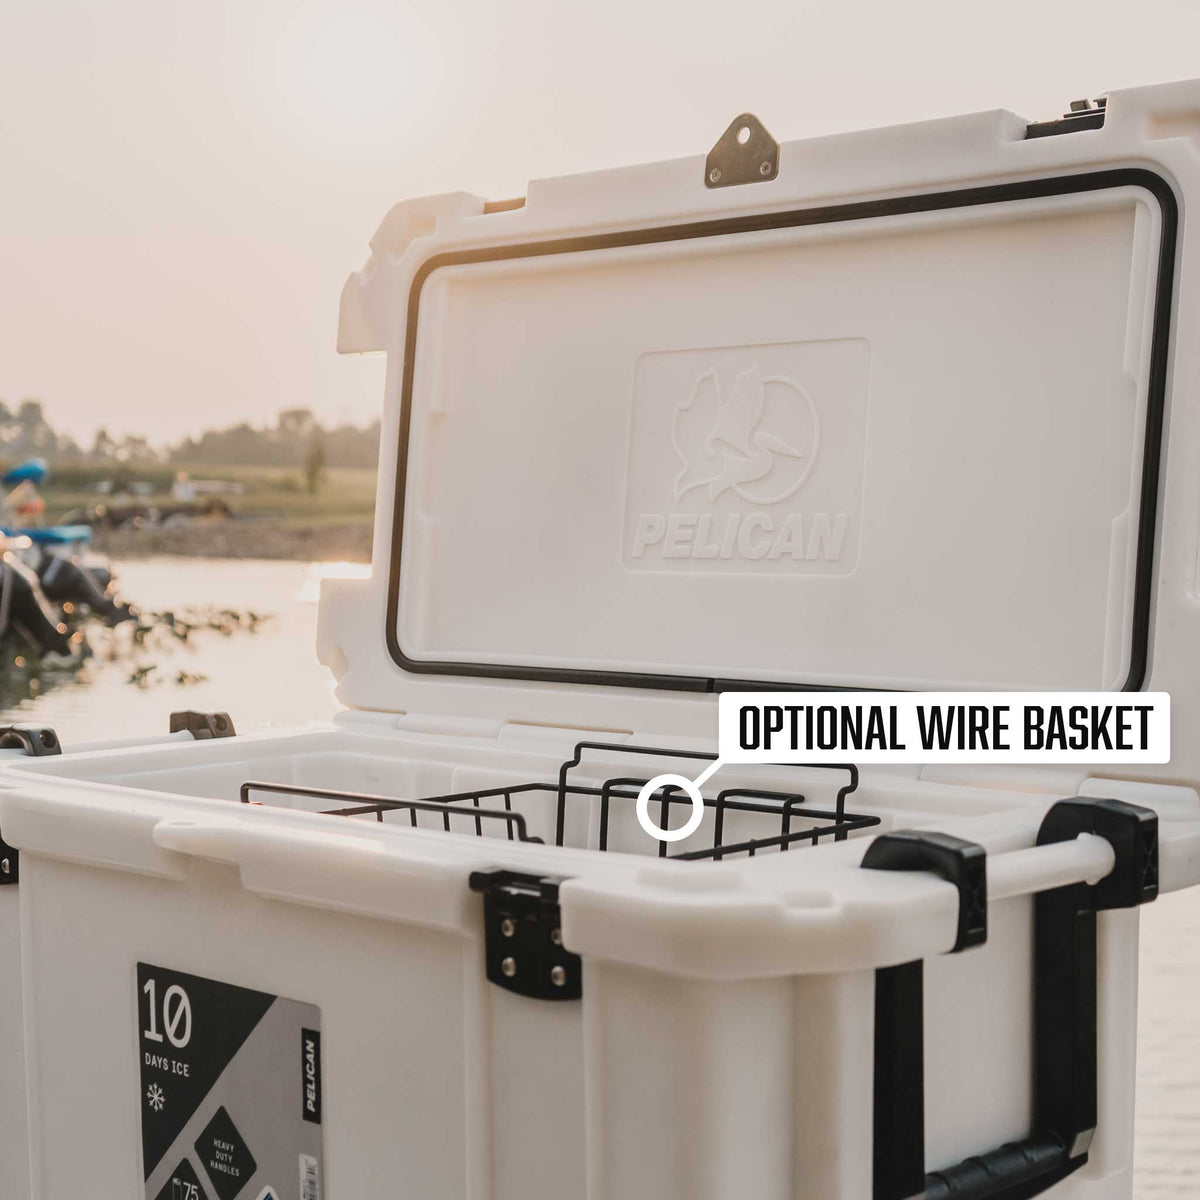 95QT Pelican Elite Cooler opened displaying the dry rack basket (sold separately) 